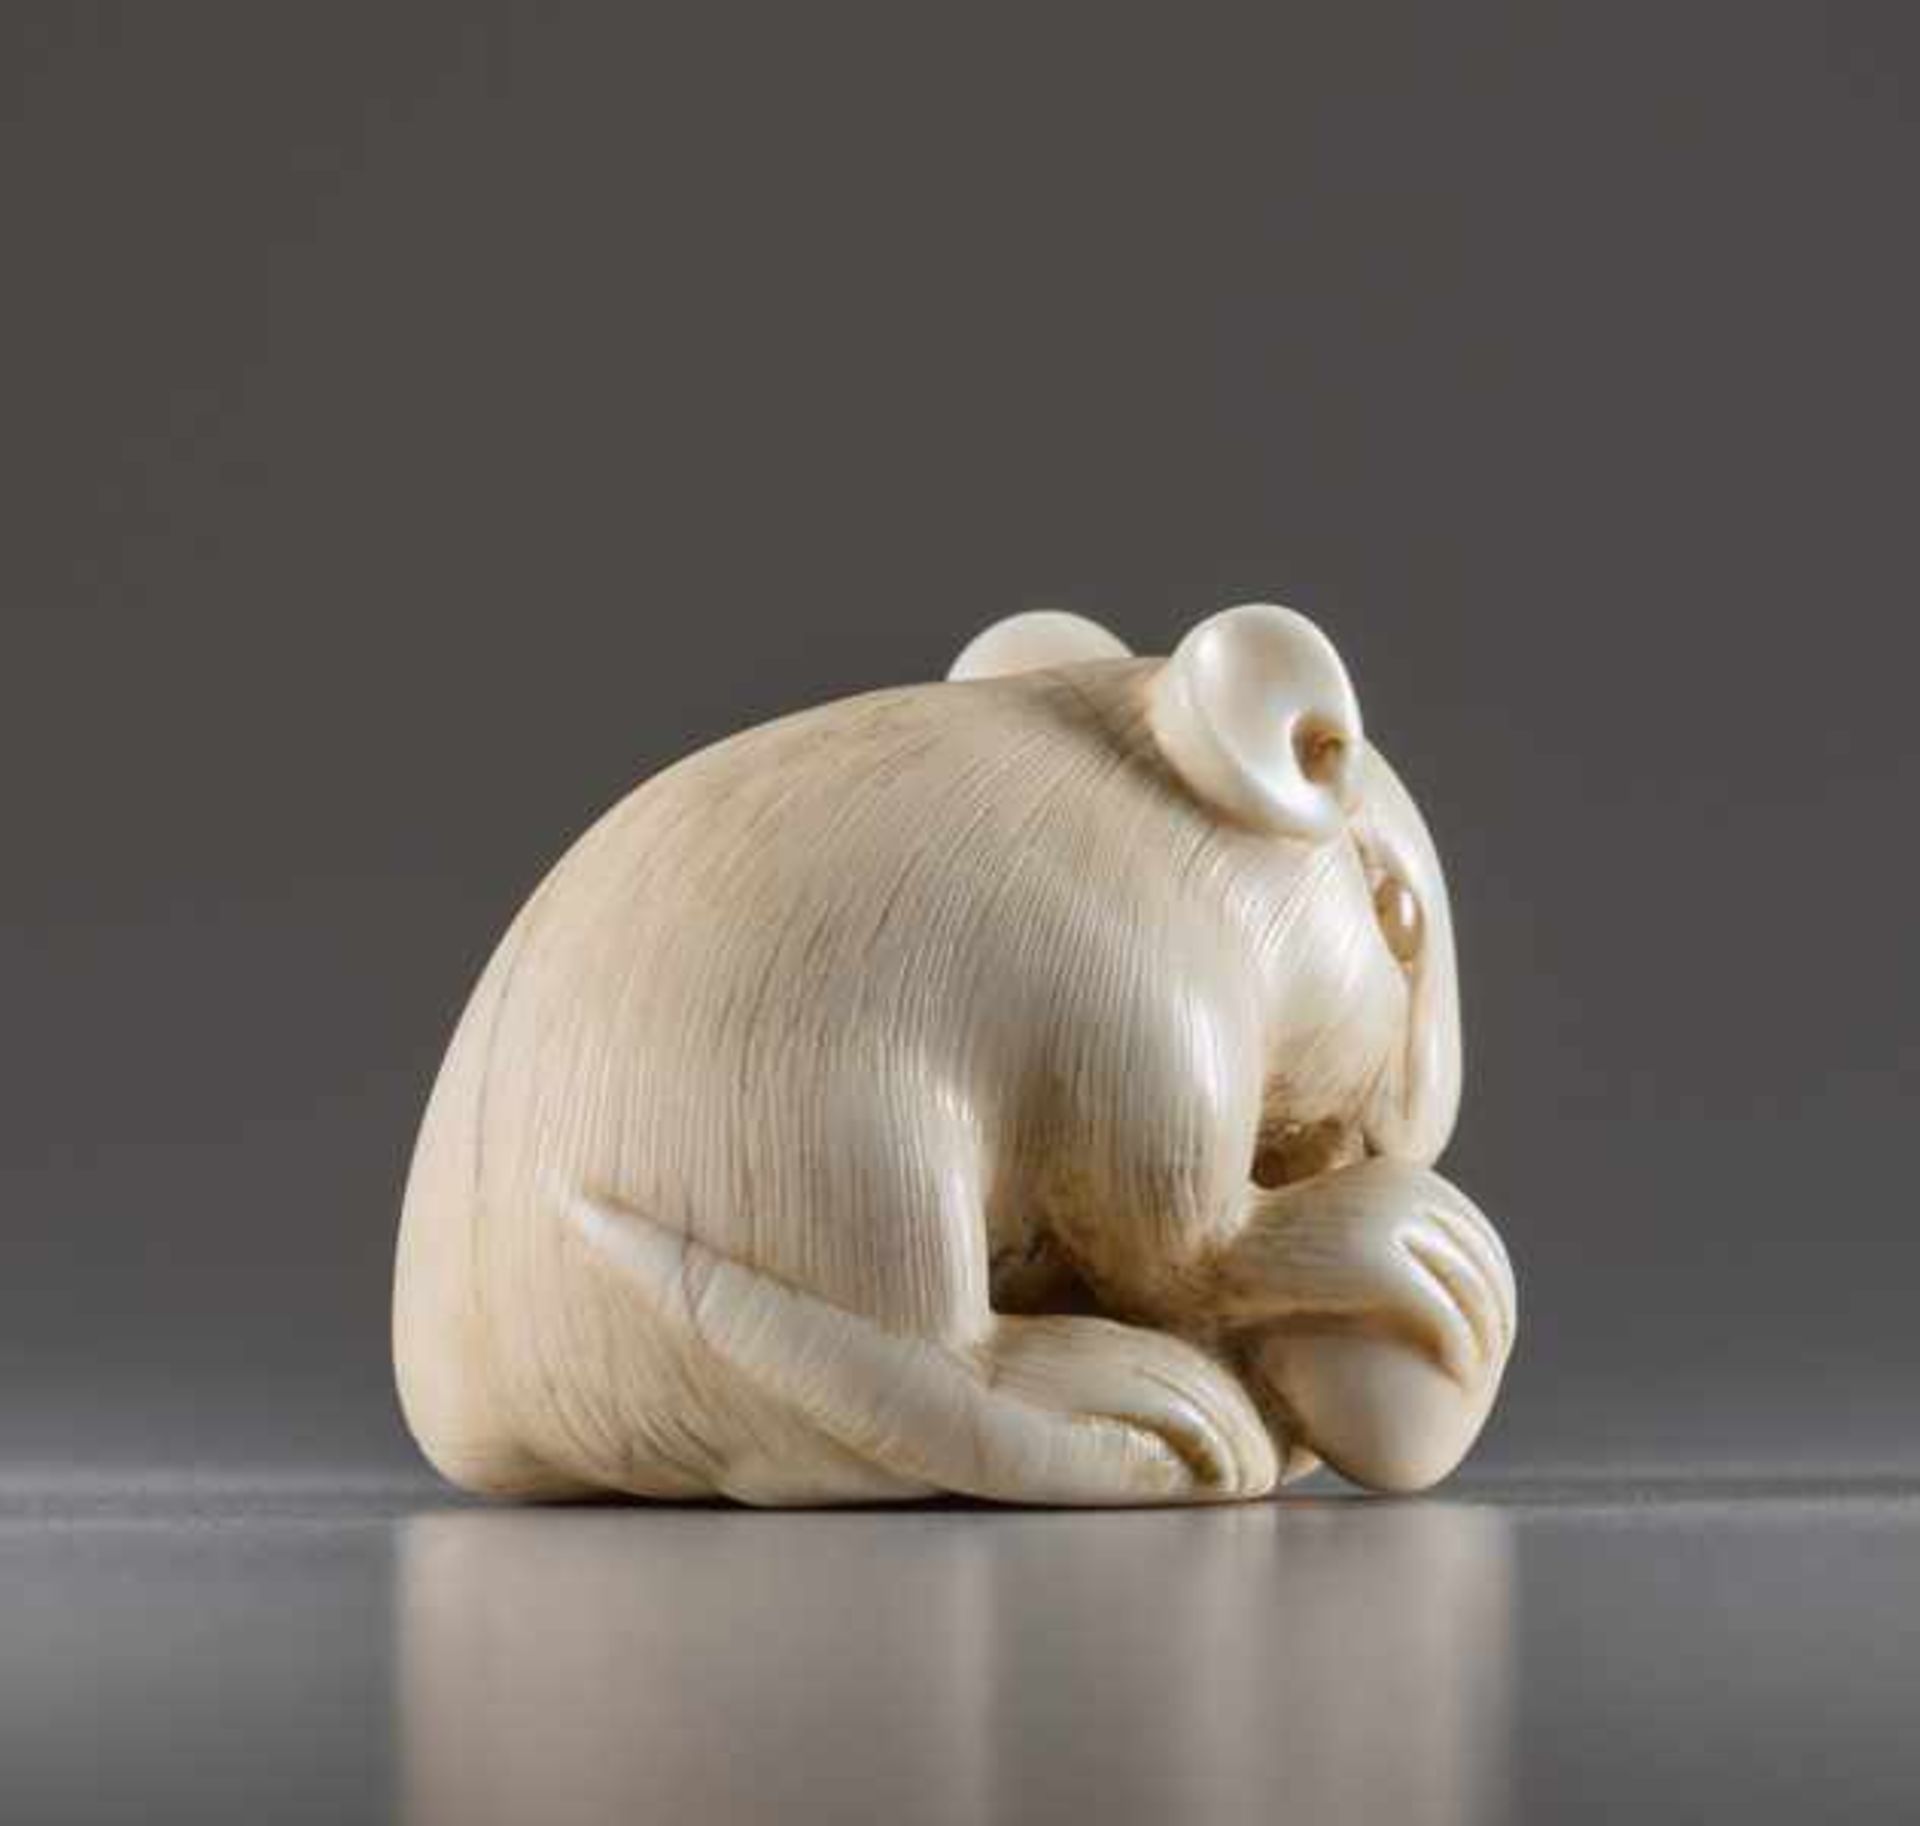 AN IVORY NETSUKE BY IKKO OF A RAT WITH DOUBLE GOURD Ivory netsuke. Japan, 19th centuryA very - Image 4 of 6